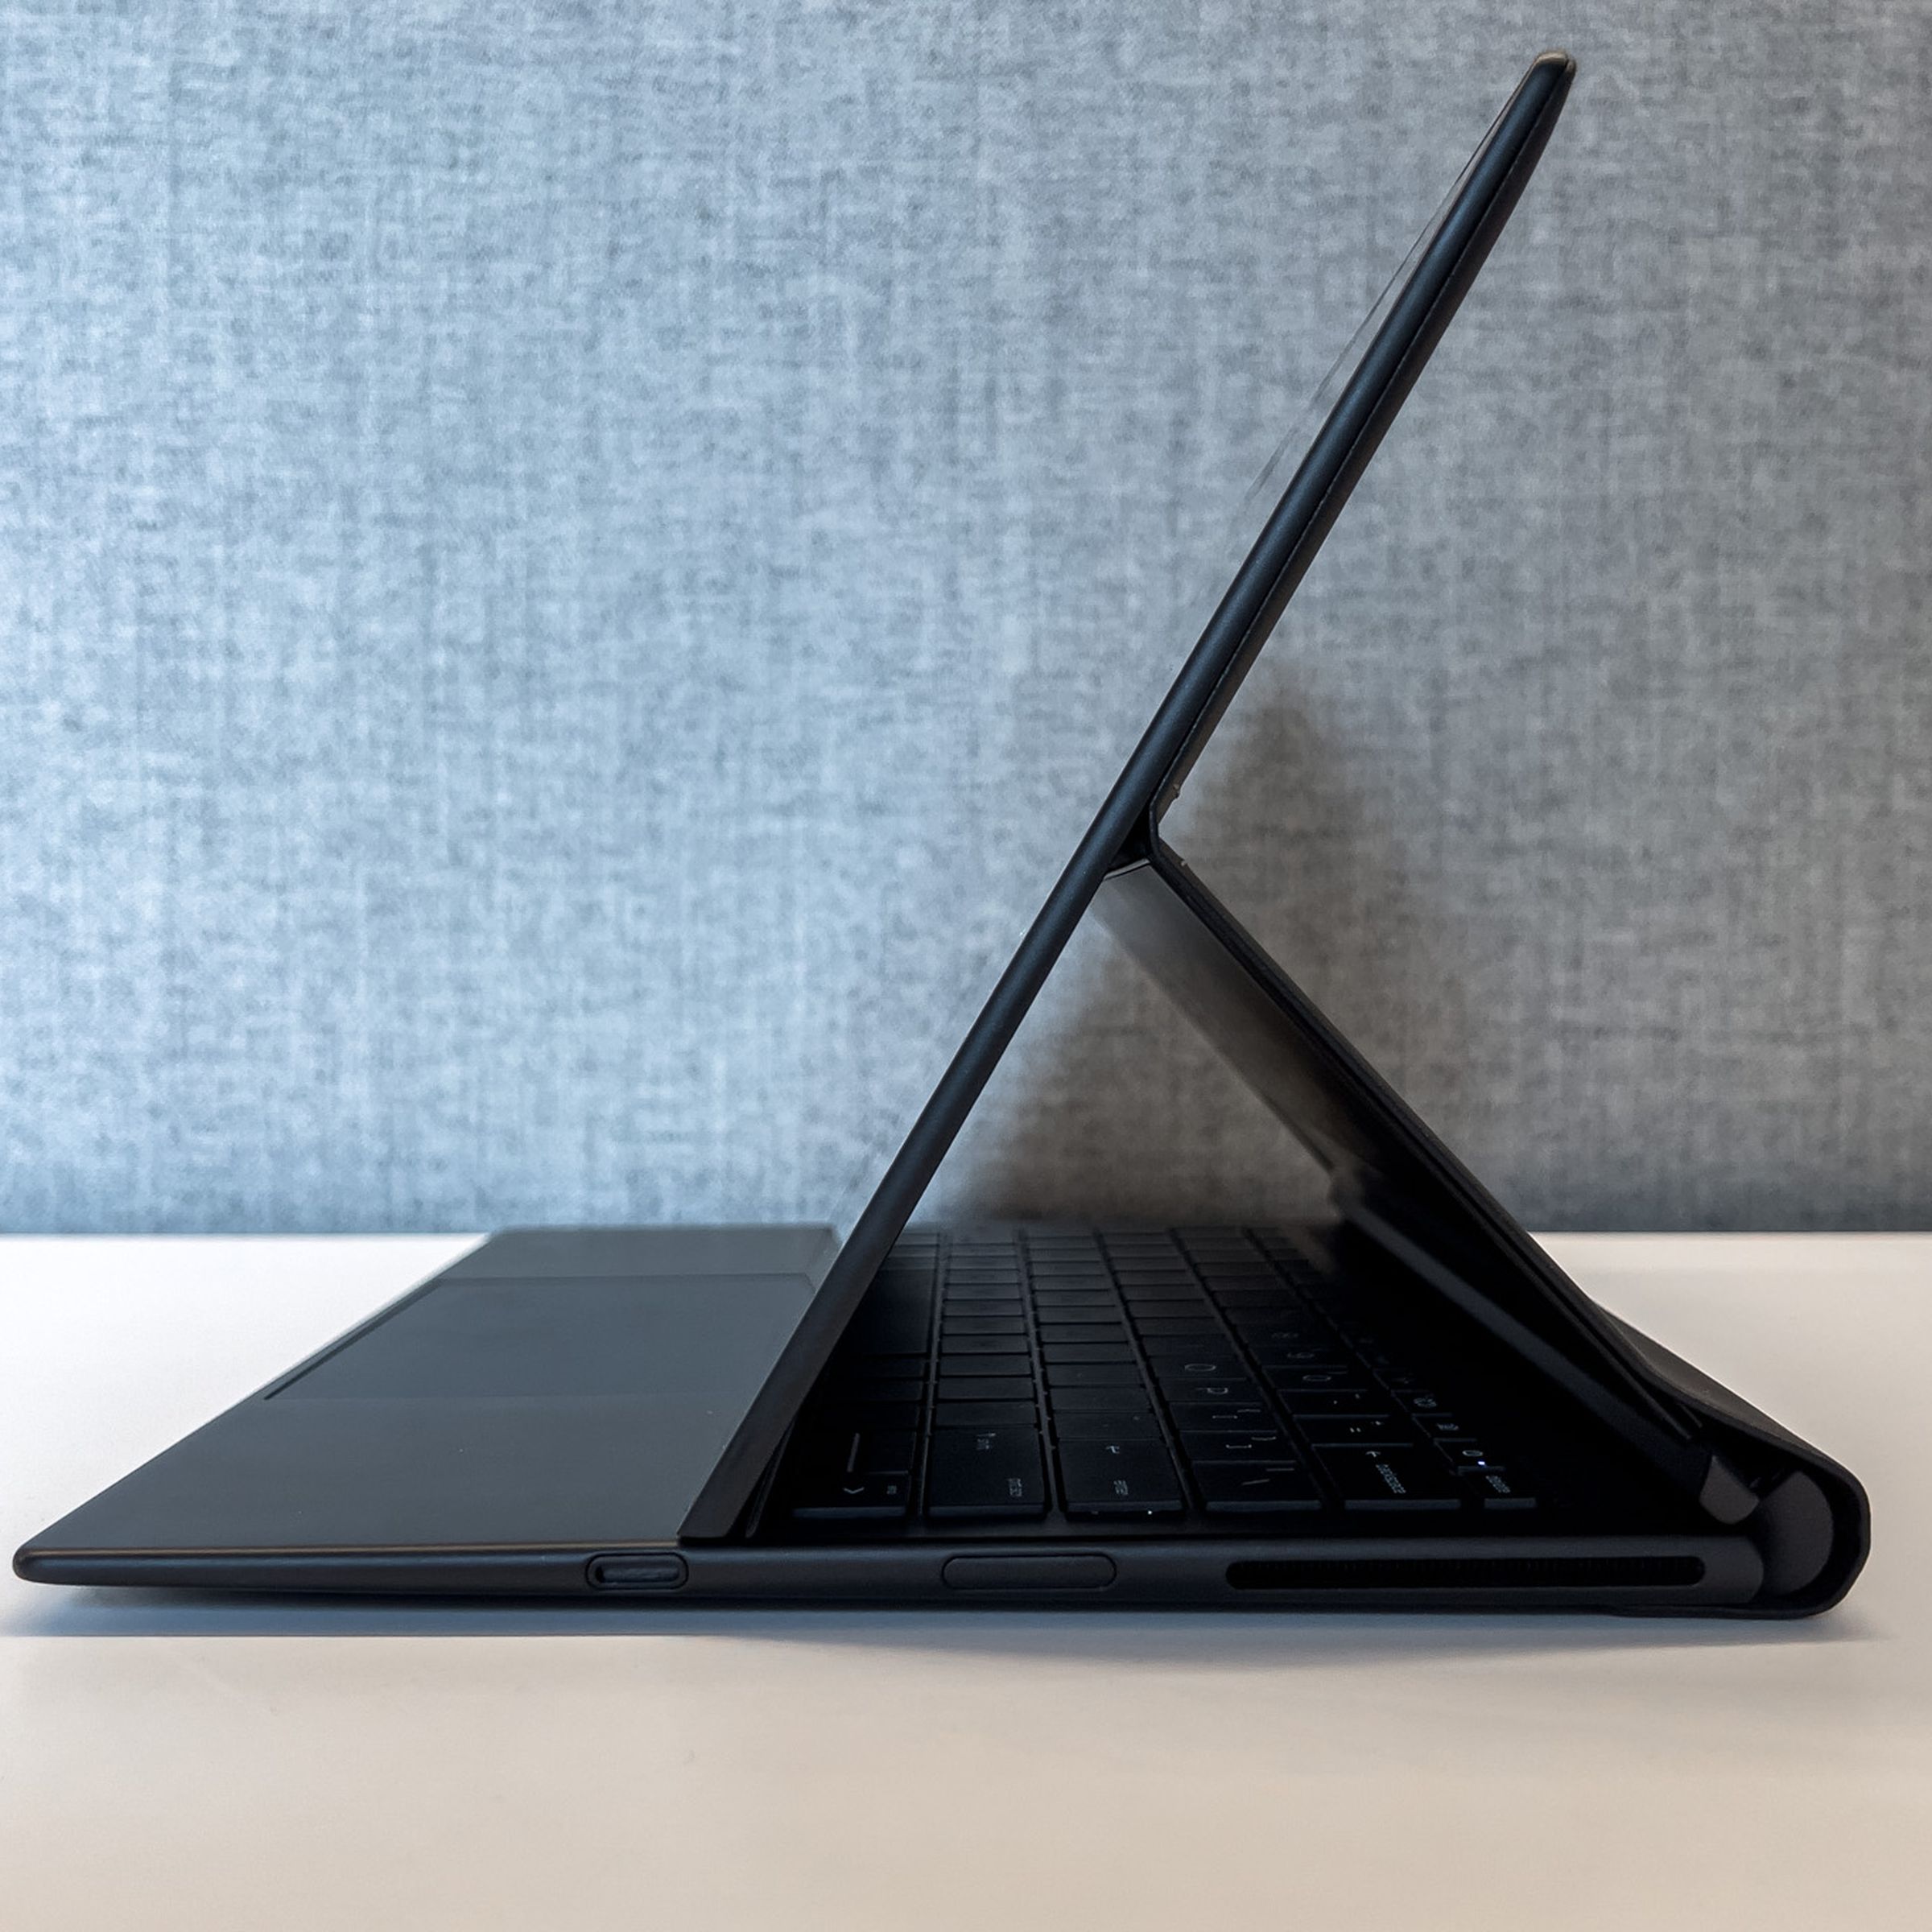 The HP Dragonfly Folio G3 on a desk in folio mode, seen from the side.